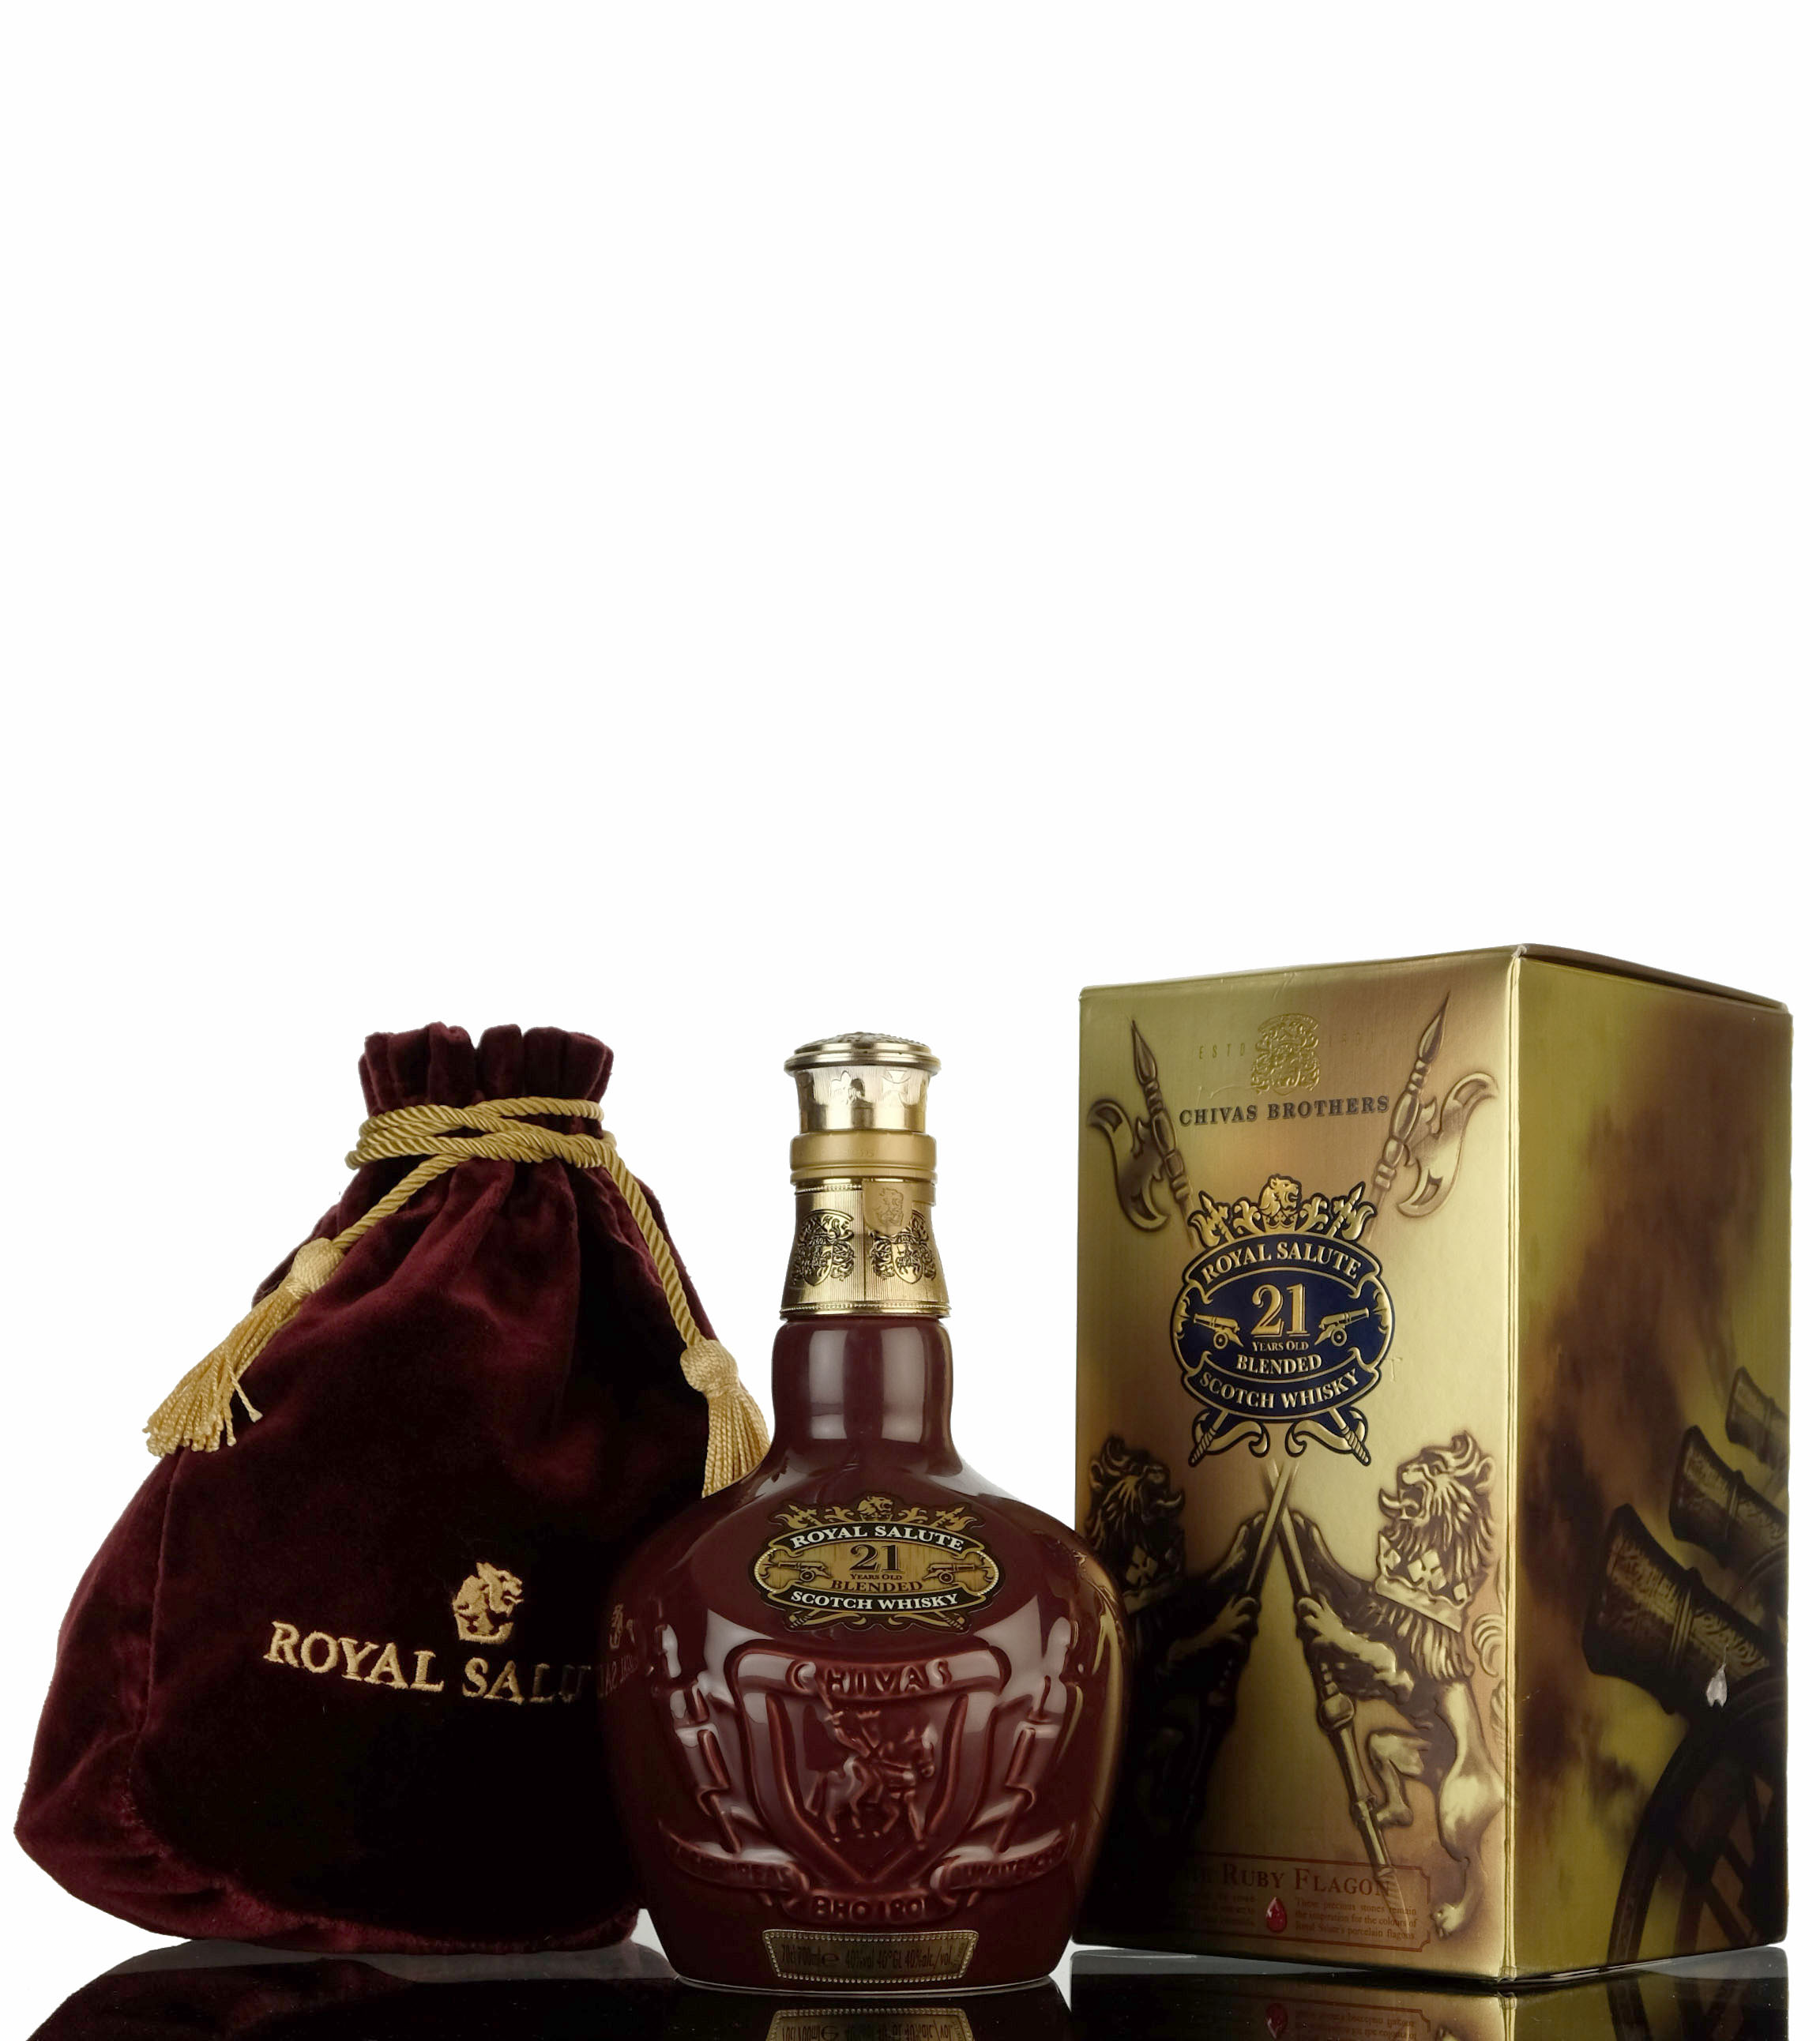 Royal Salute 21 Year Old - Burgundy Decanter